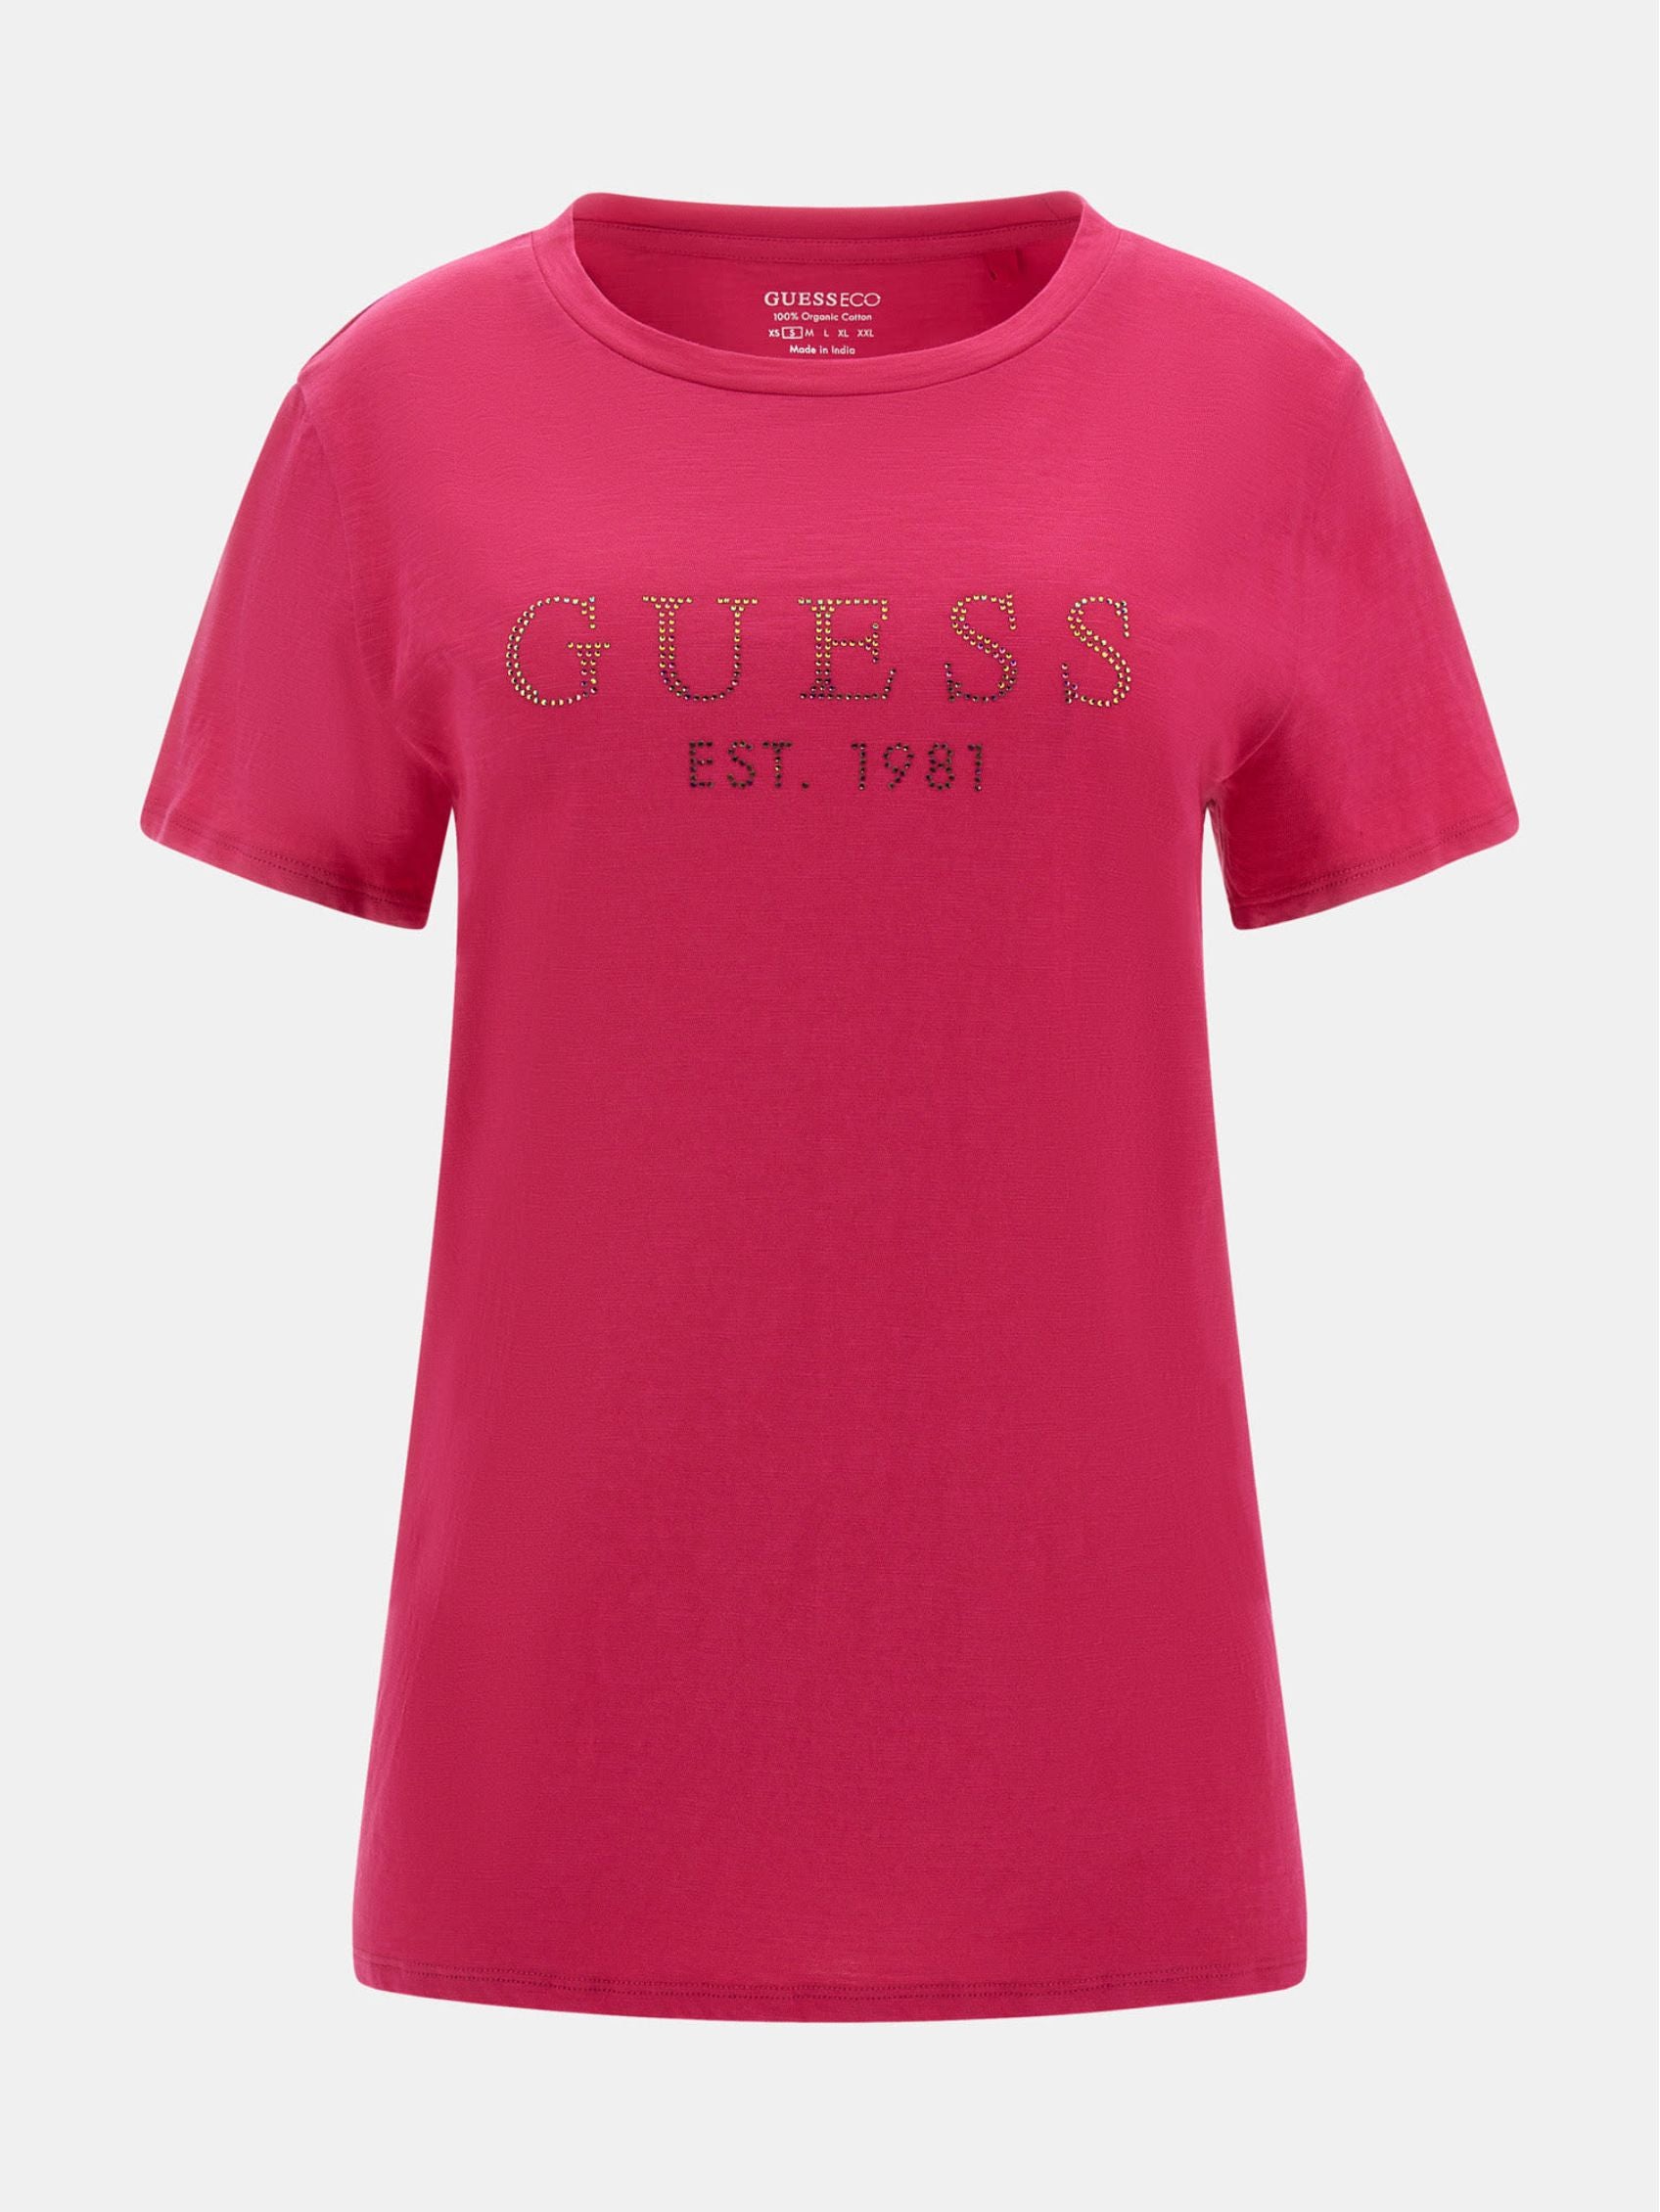 Guess C76002 Lds Ss Guess 1981 Crystal Easy Tee Pink